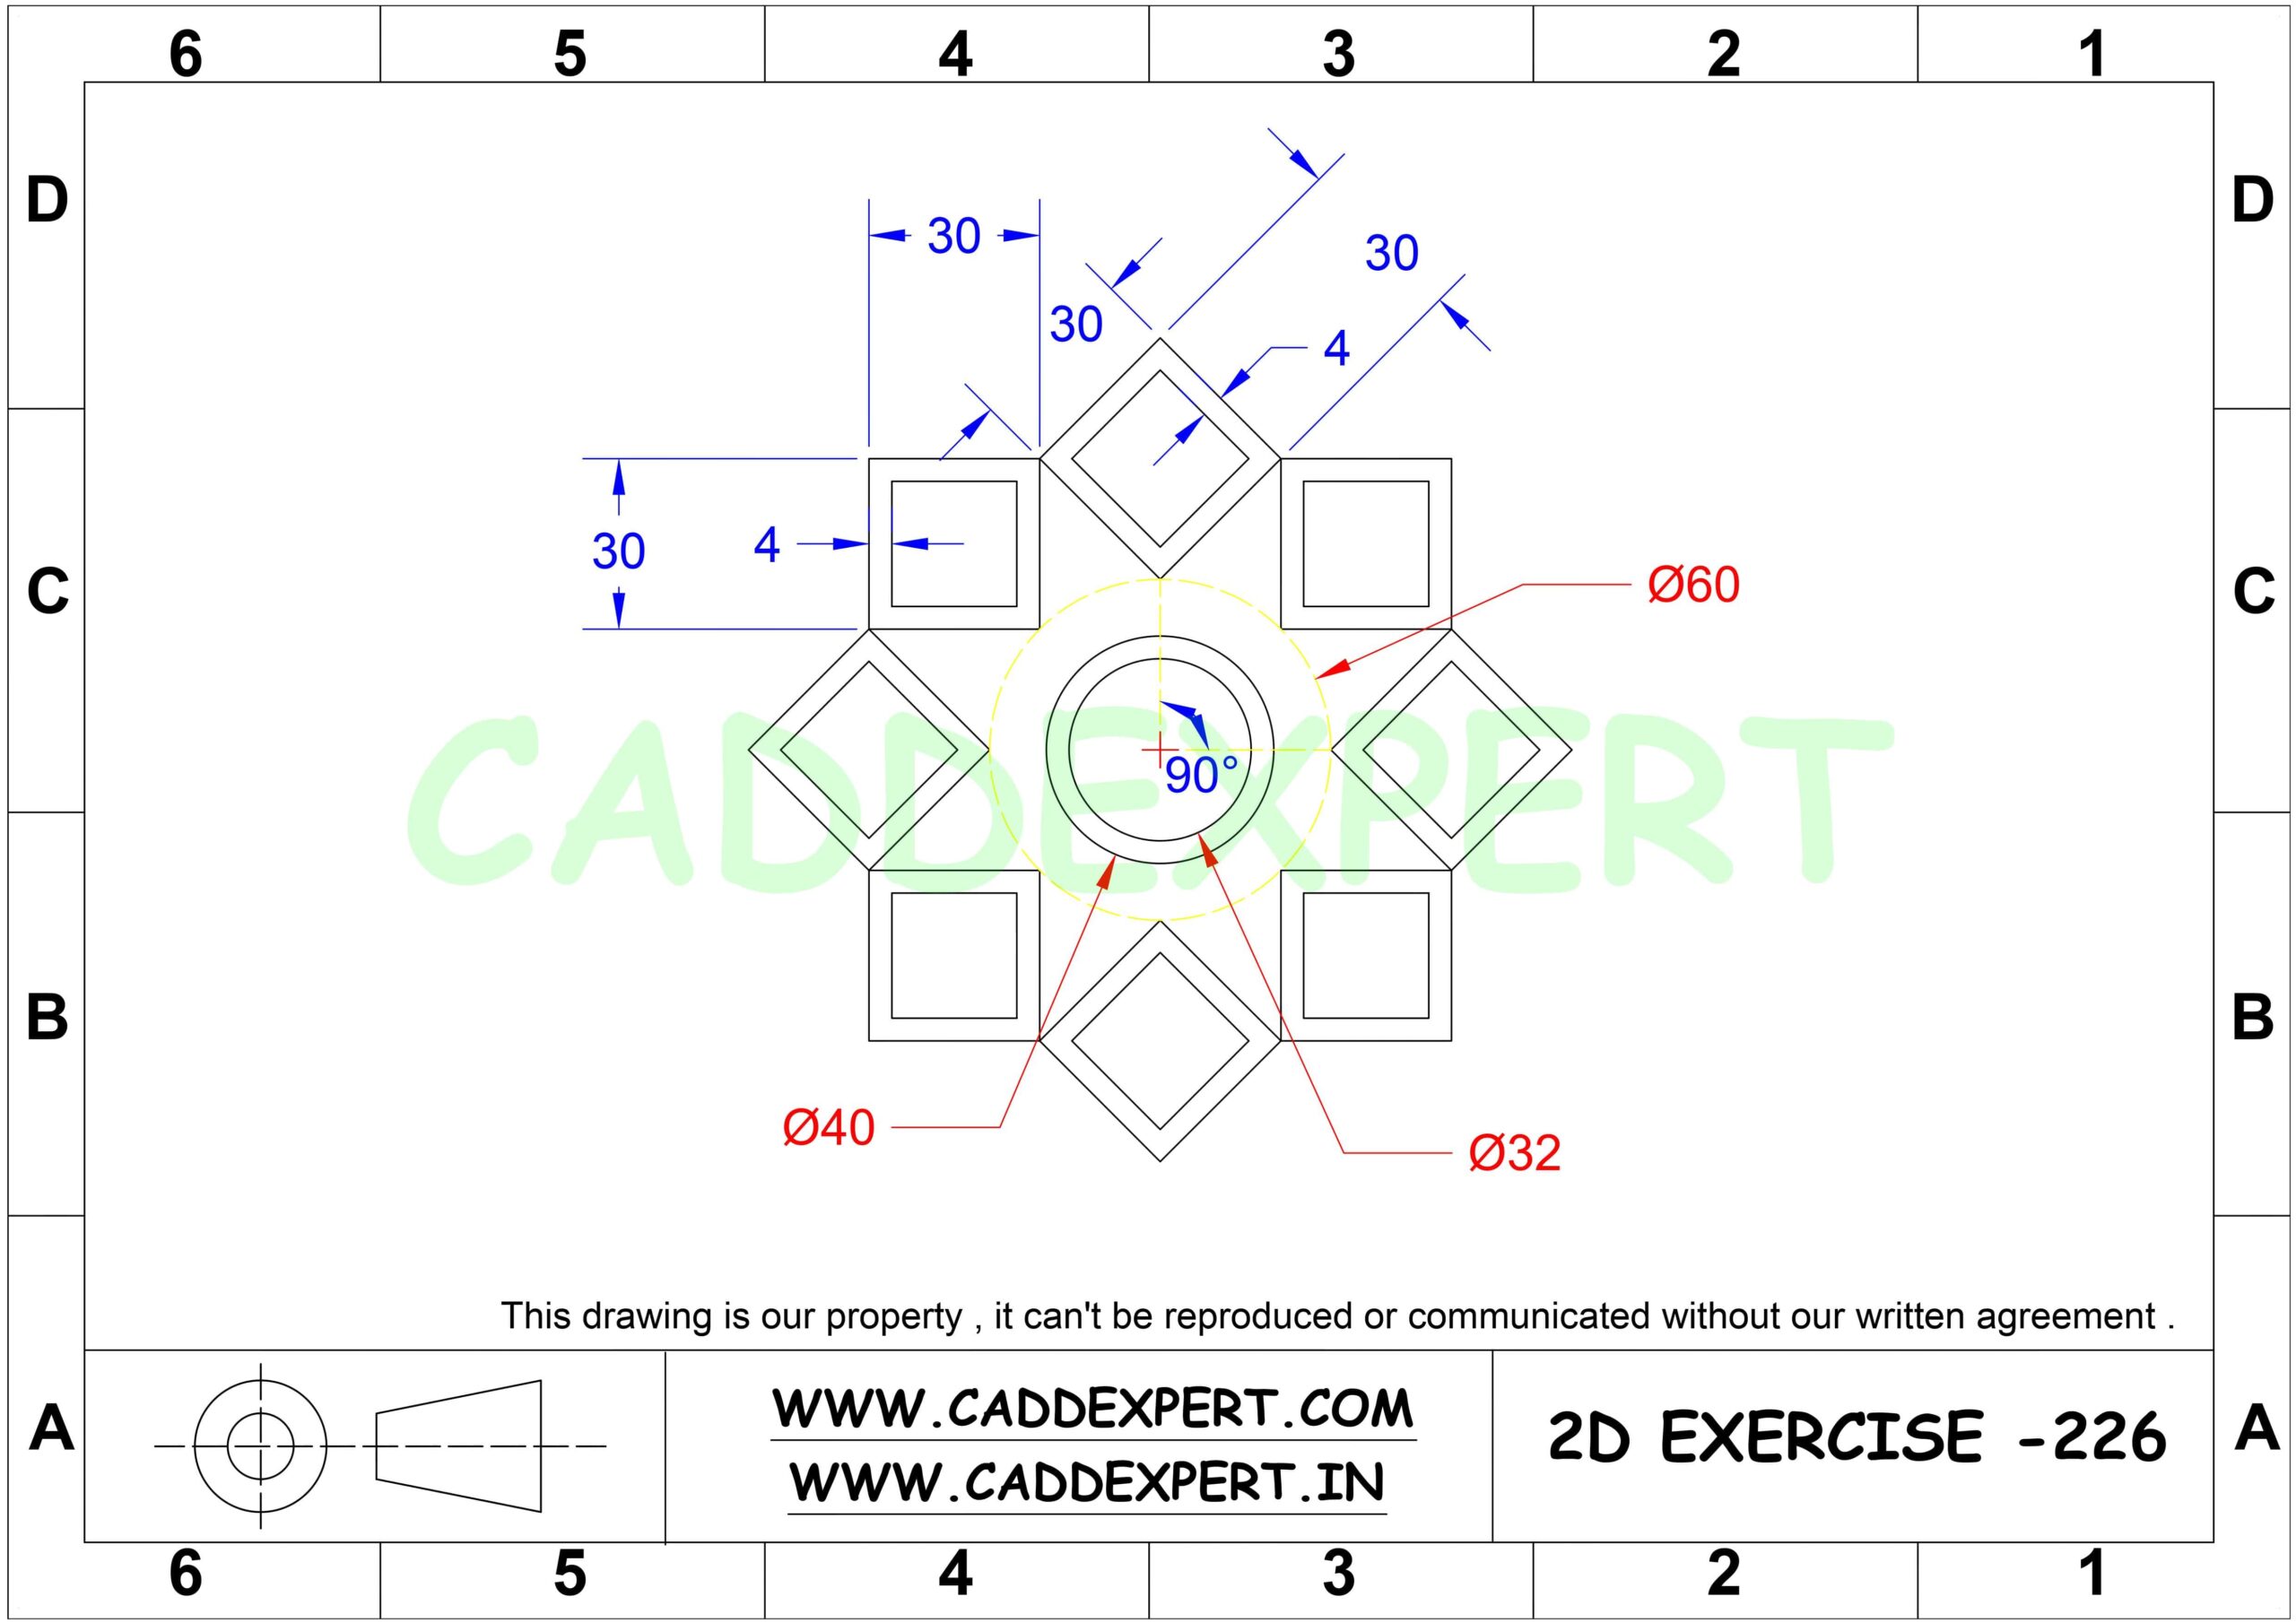 50 AUTOCAD PRACTICE DRAWING - 26